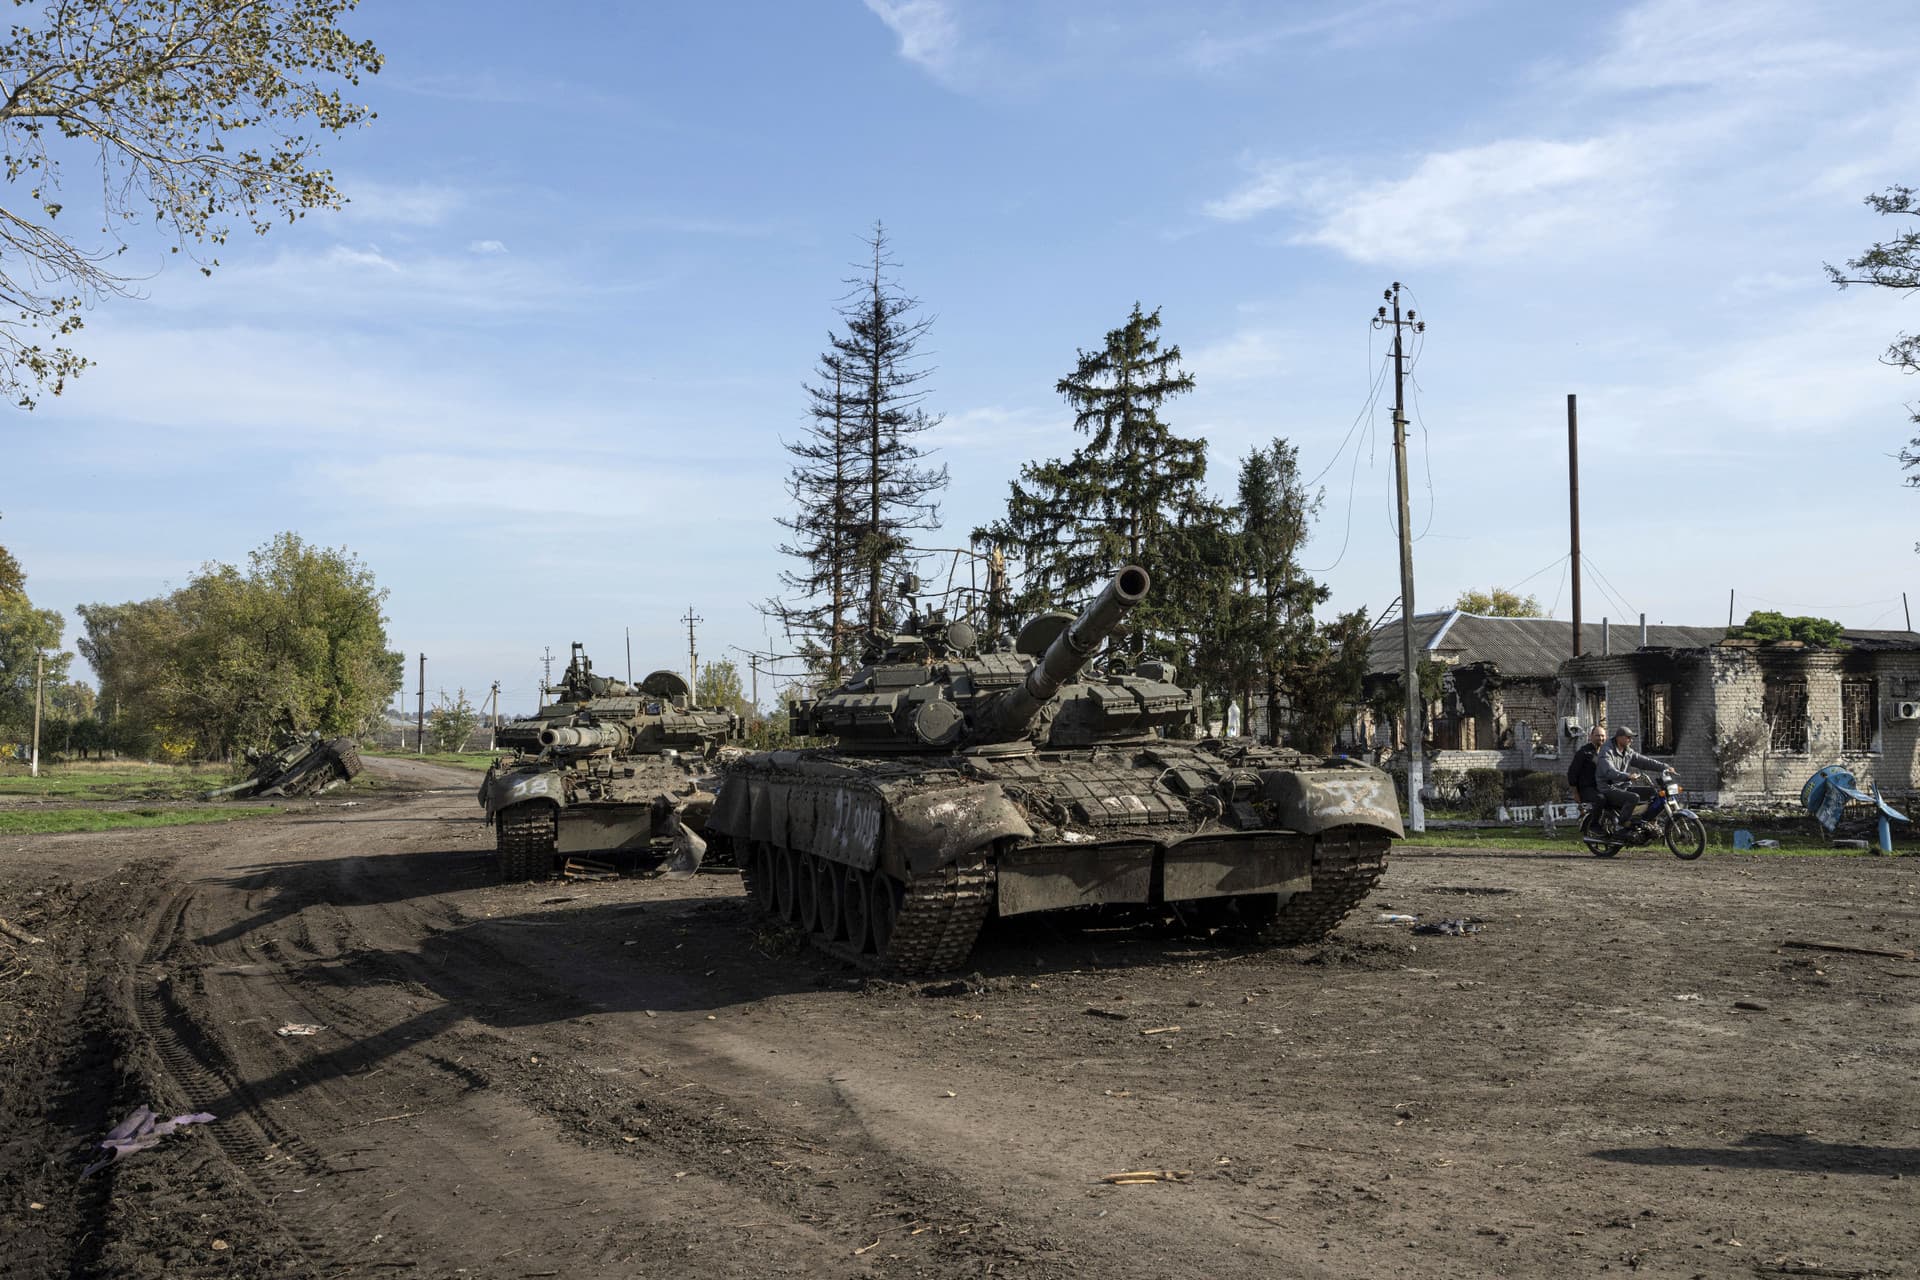 Abandoned Russian tanks stand on the road in recently liberated town Kupiansk